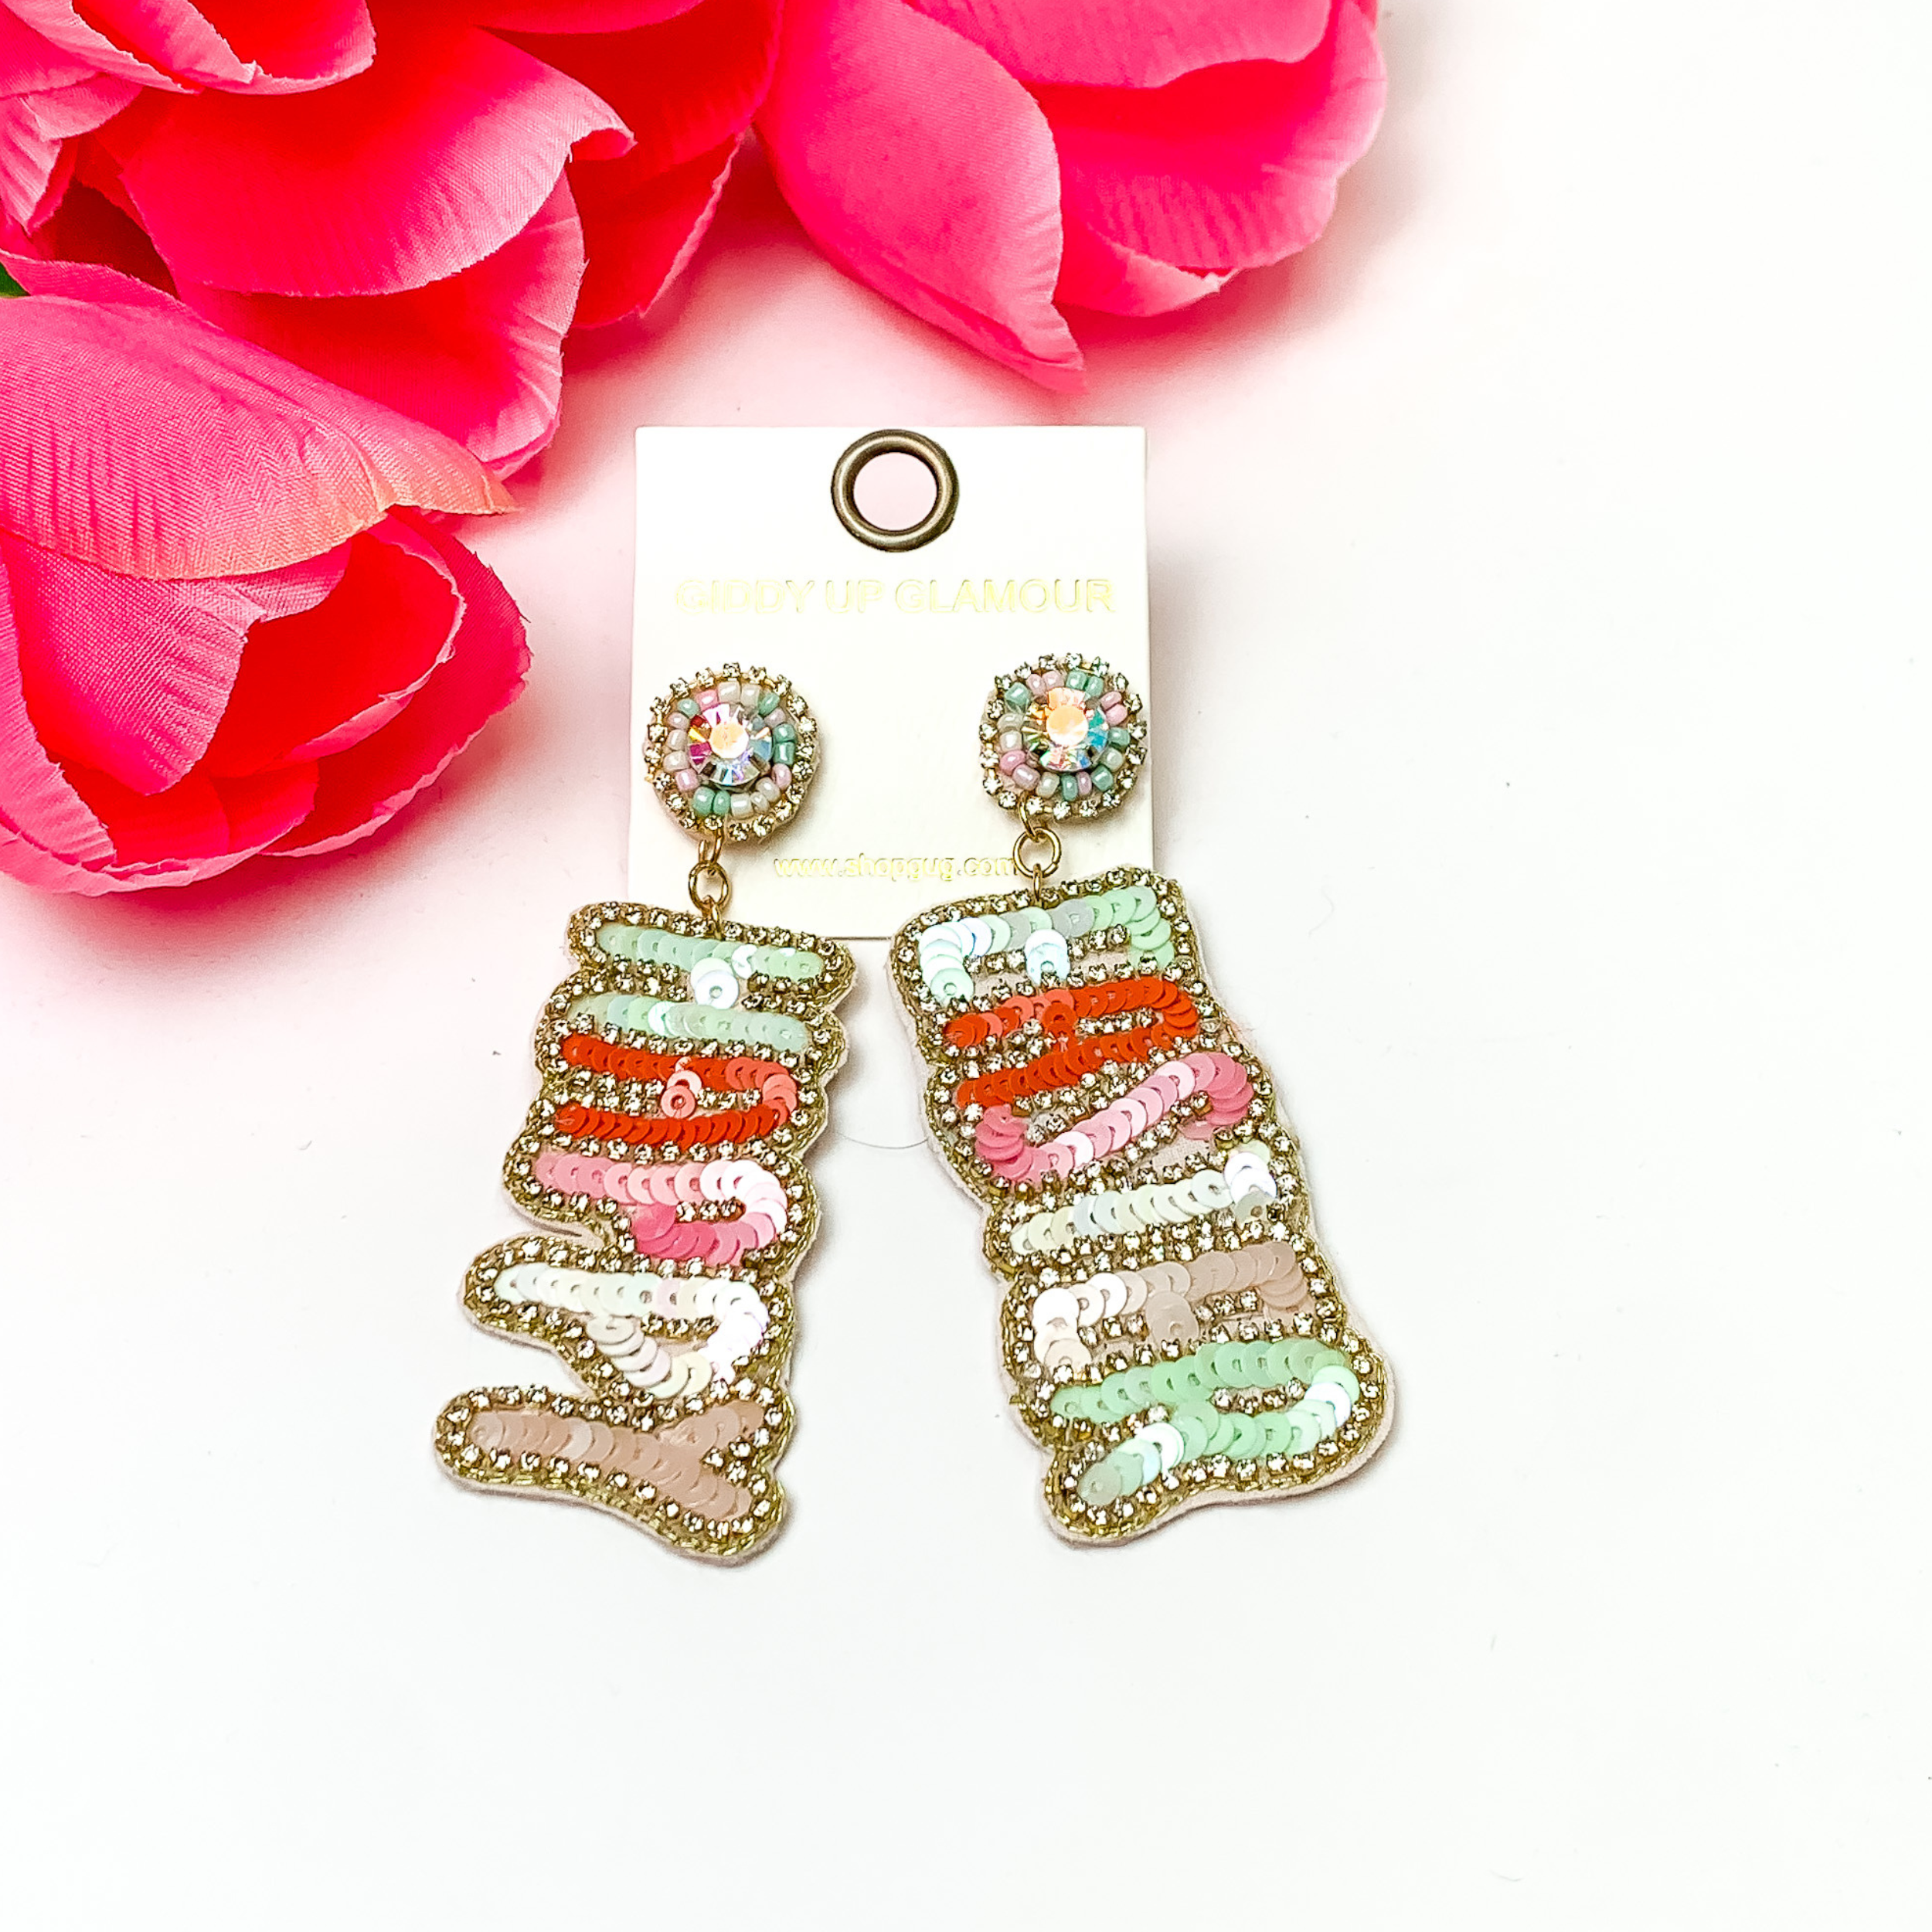 Pastel colored sequin beaded earrings. One earrings has the word "HAPPY" and the other earring has the word "EASTER" and each letter is a different pastel color. The words are hanging on clear crystal studs with nuetral colored beads around the crystal. These earrings are pictured on a white background with red- coral flowers in the left corner.